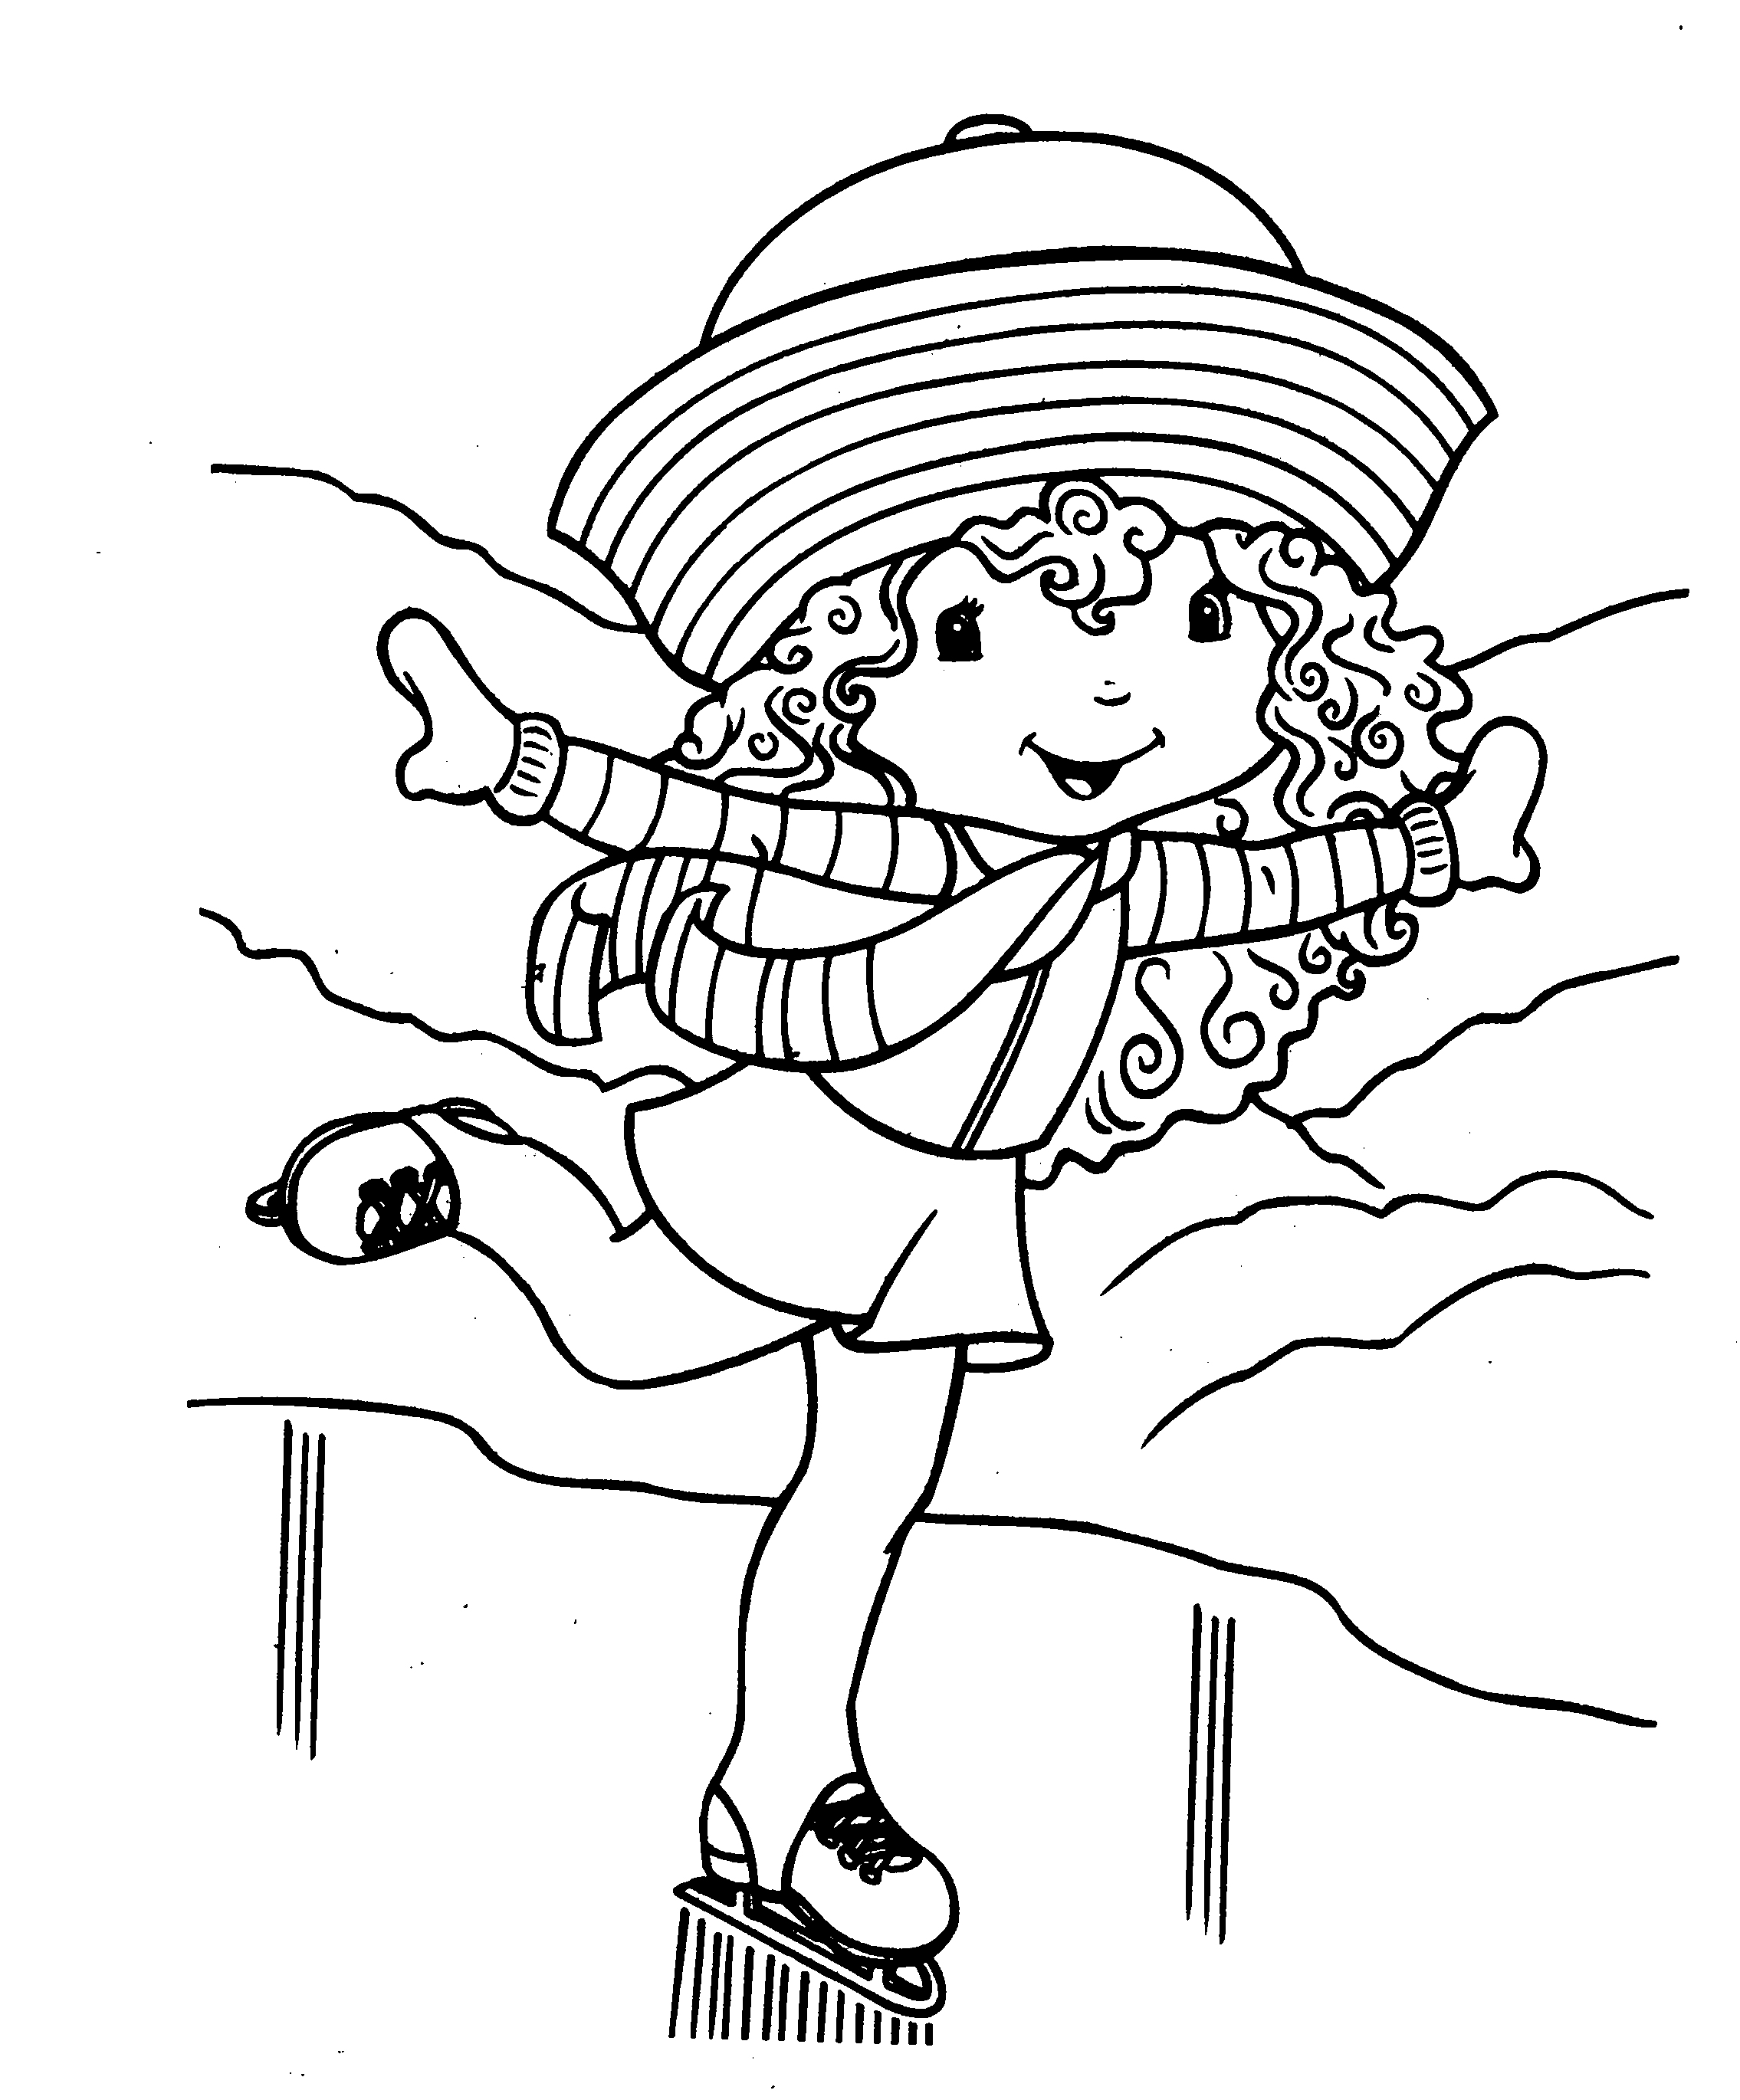 Strawberry Shortcake Coloring Pages Chat Noir Scholastic - Coloring Page Book Strawberry Shortcake , HD Wallpaper & Backgrounds